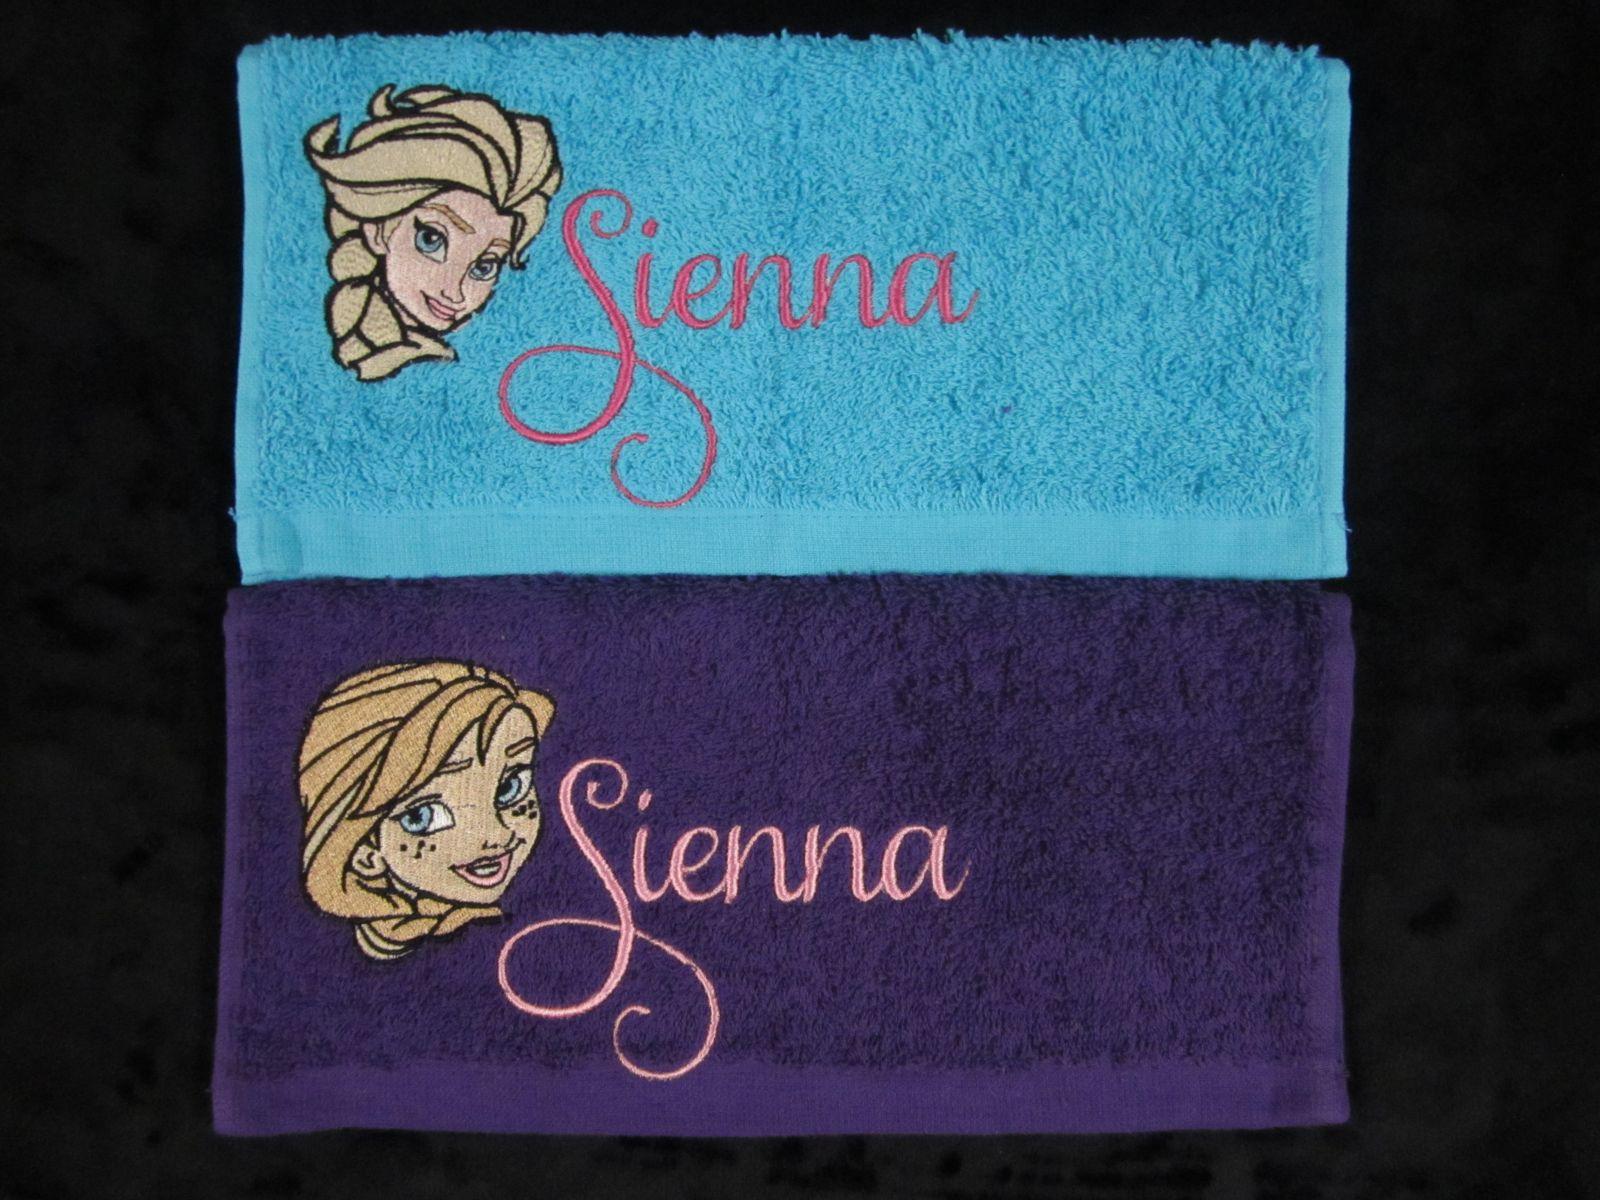 Towel with Frozen embroidery designs